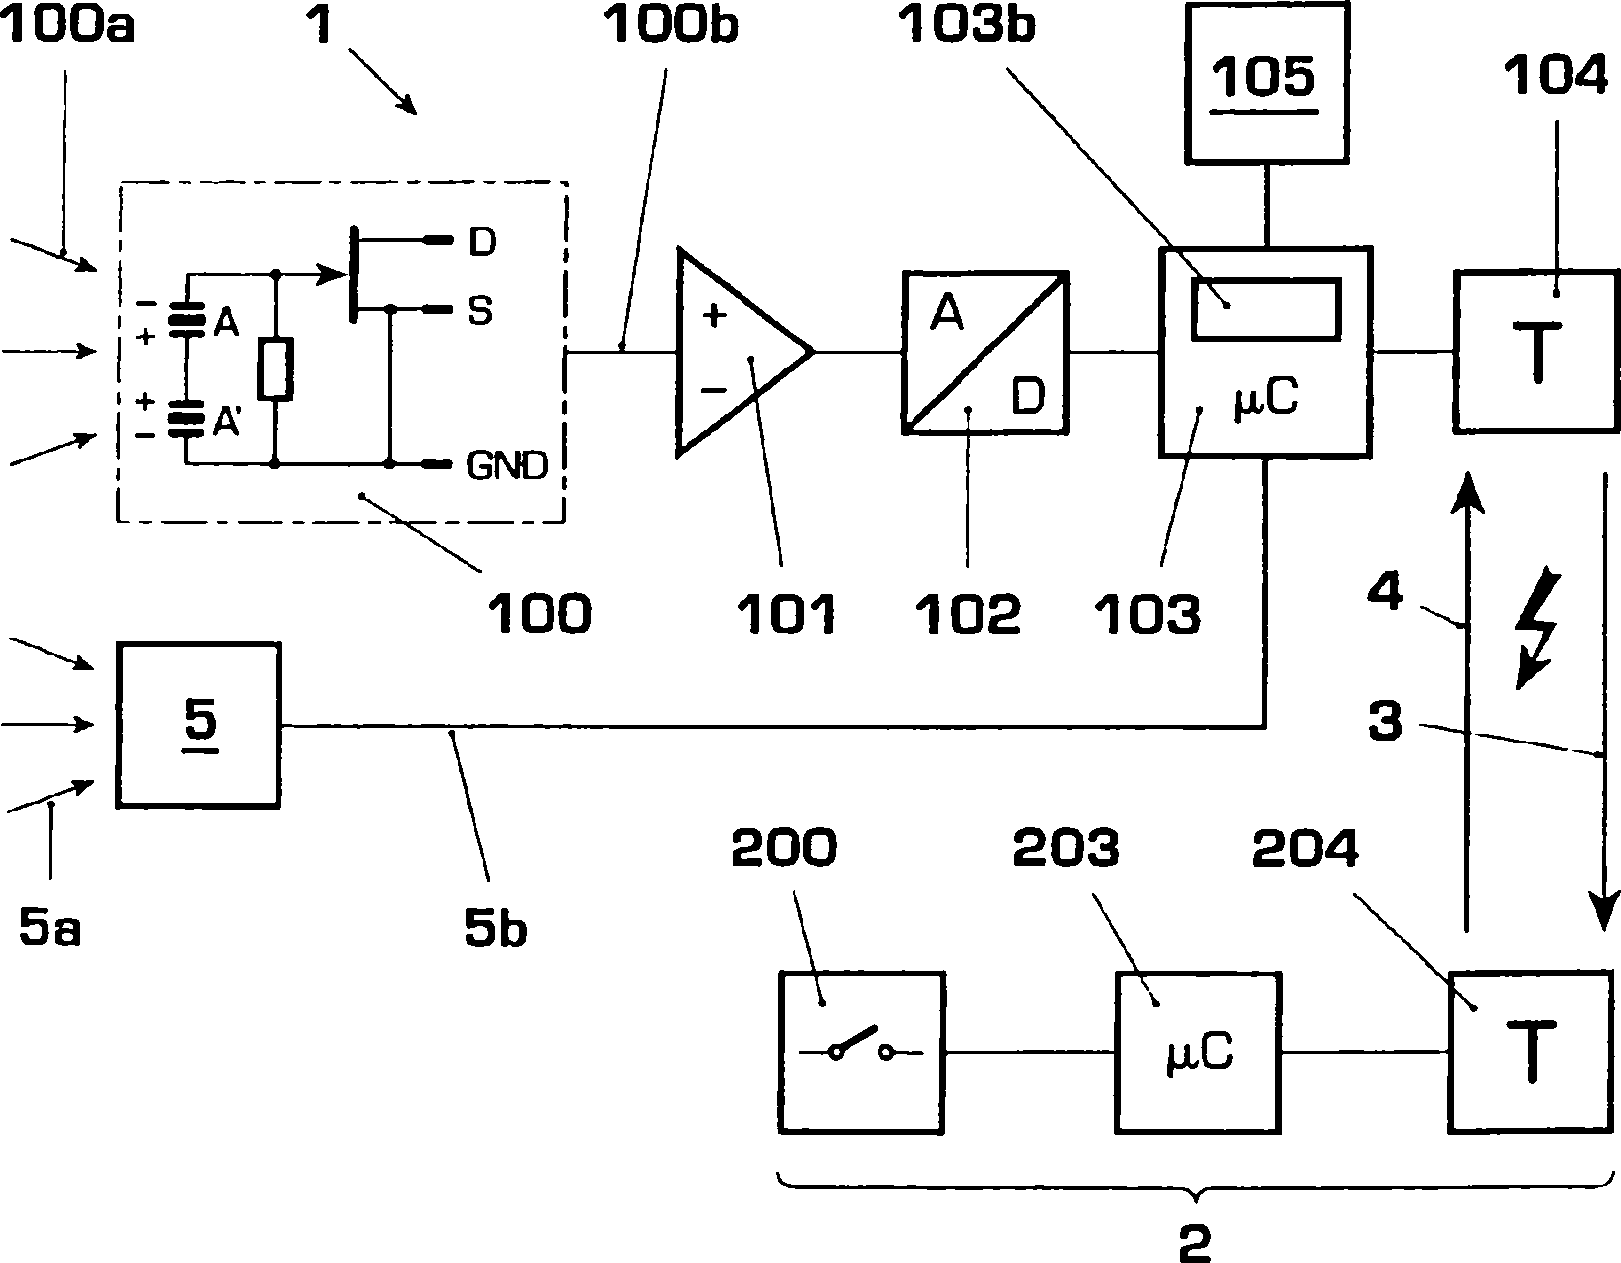 Method and apparatus for reducing power consumption in battery-operated devices